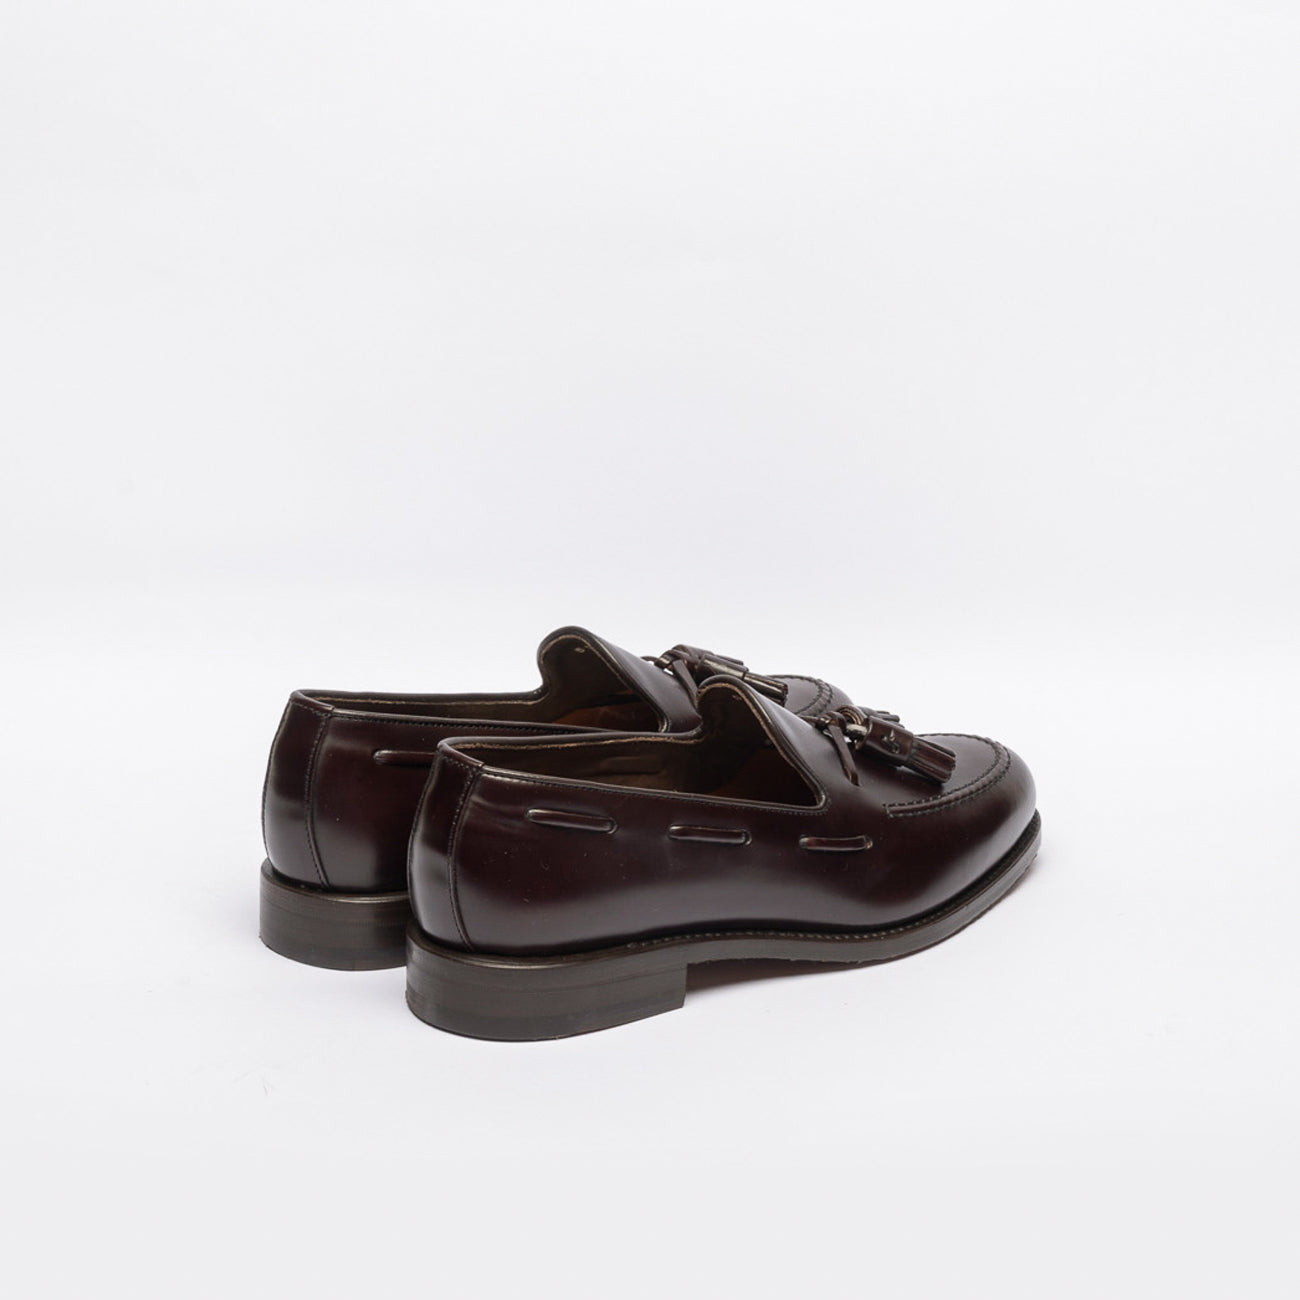 Berwick 5139 brown leather loafer with tassels